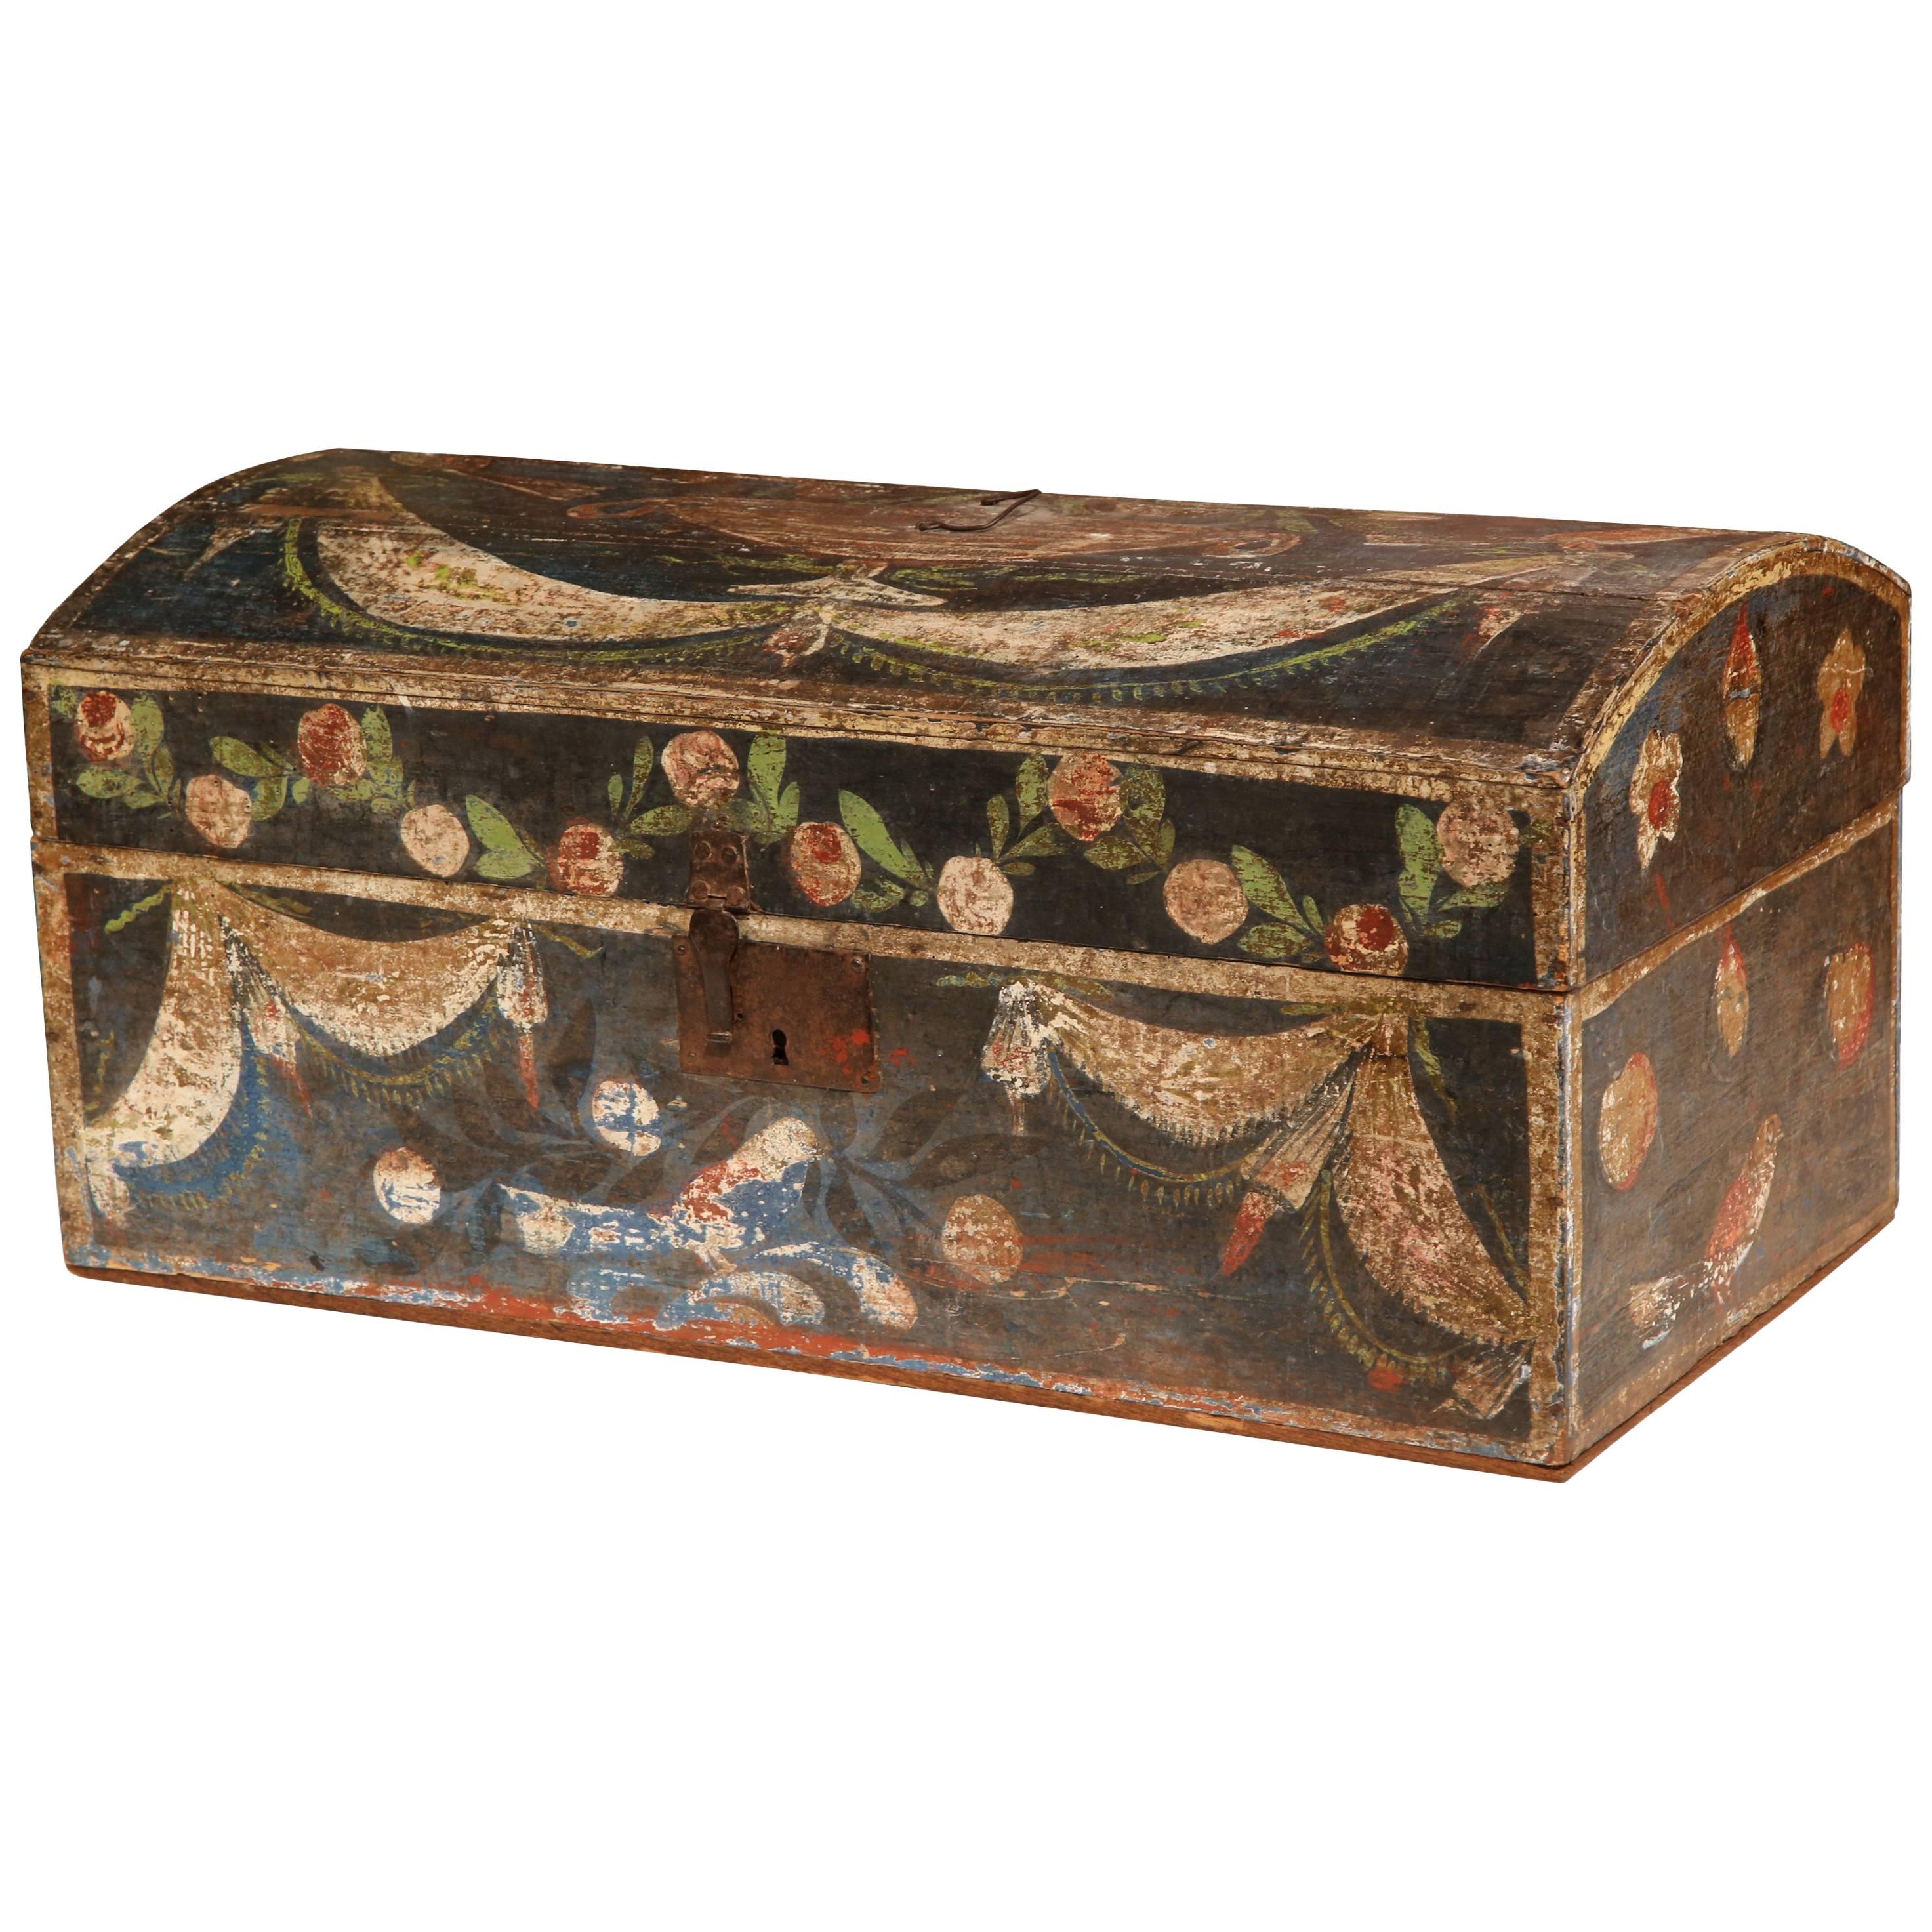 18th Century French Painted Wedding Box from Normandy with Birds and Flowers